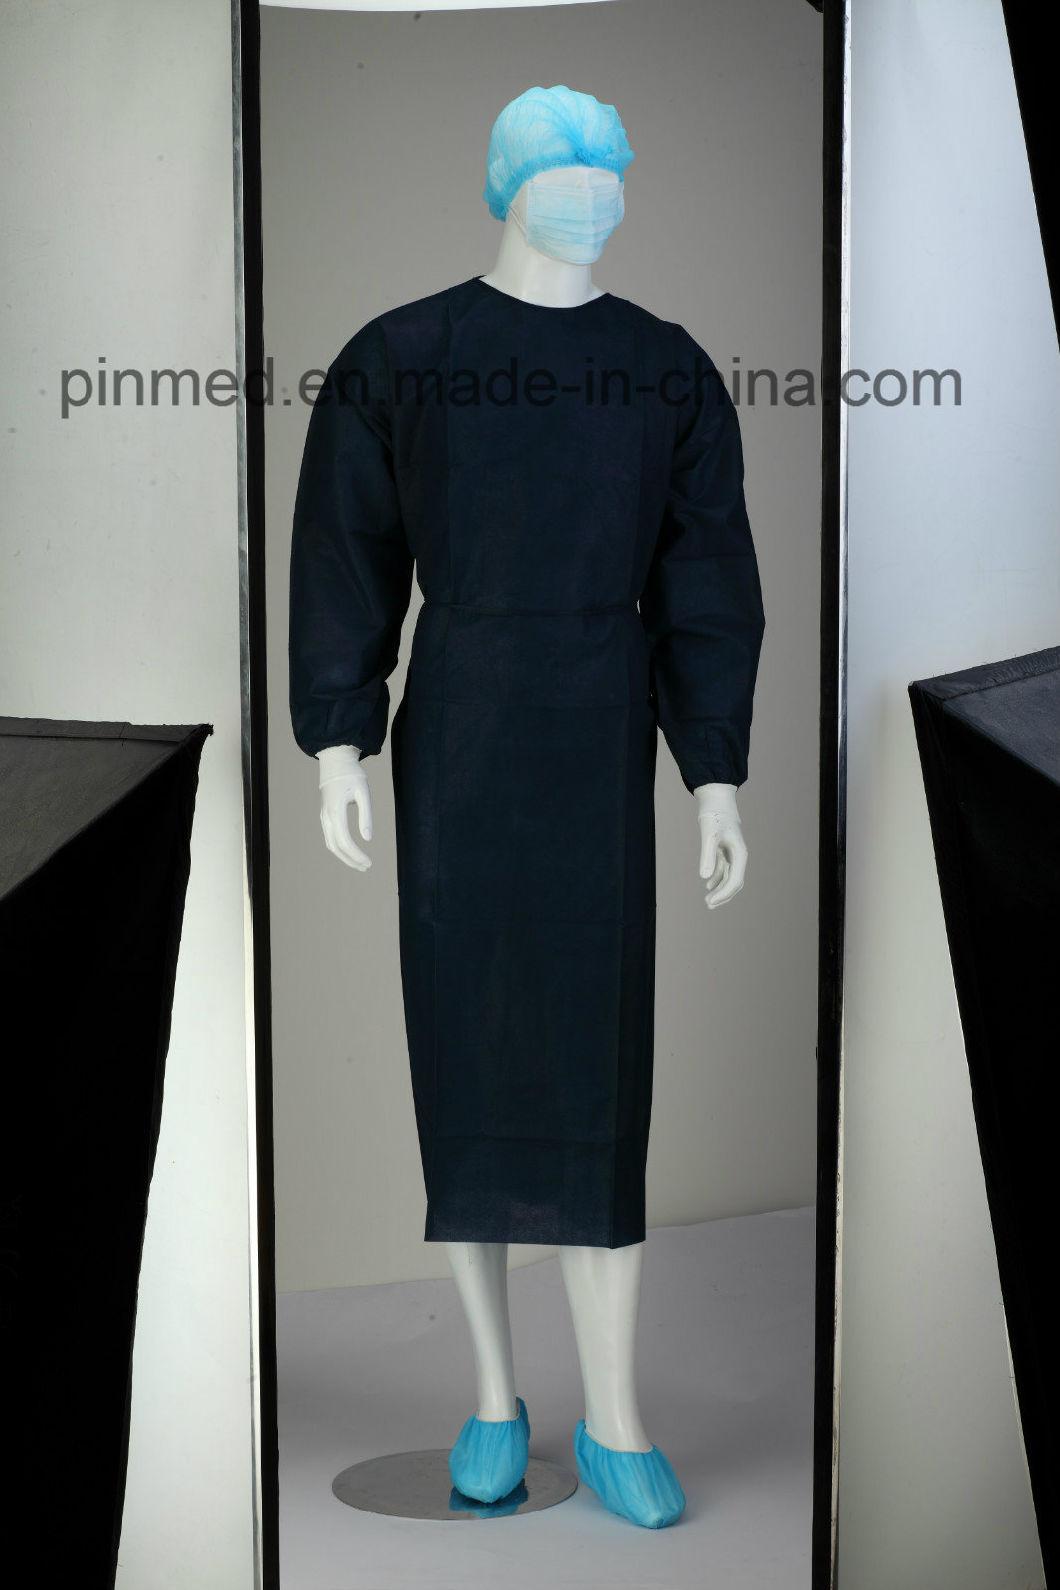 Pinmed Disposable Impervious Isolation Gown